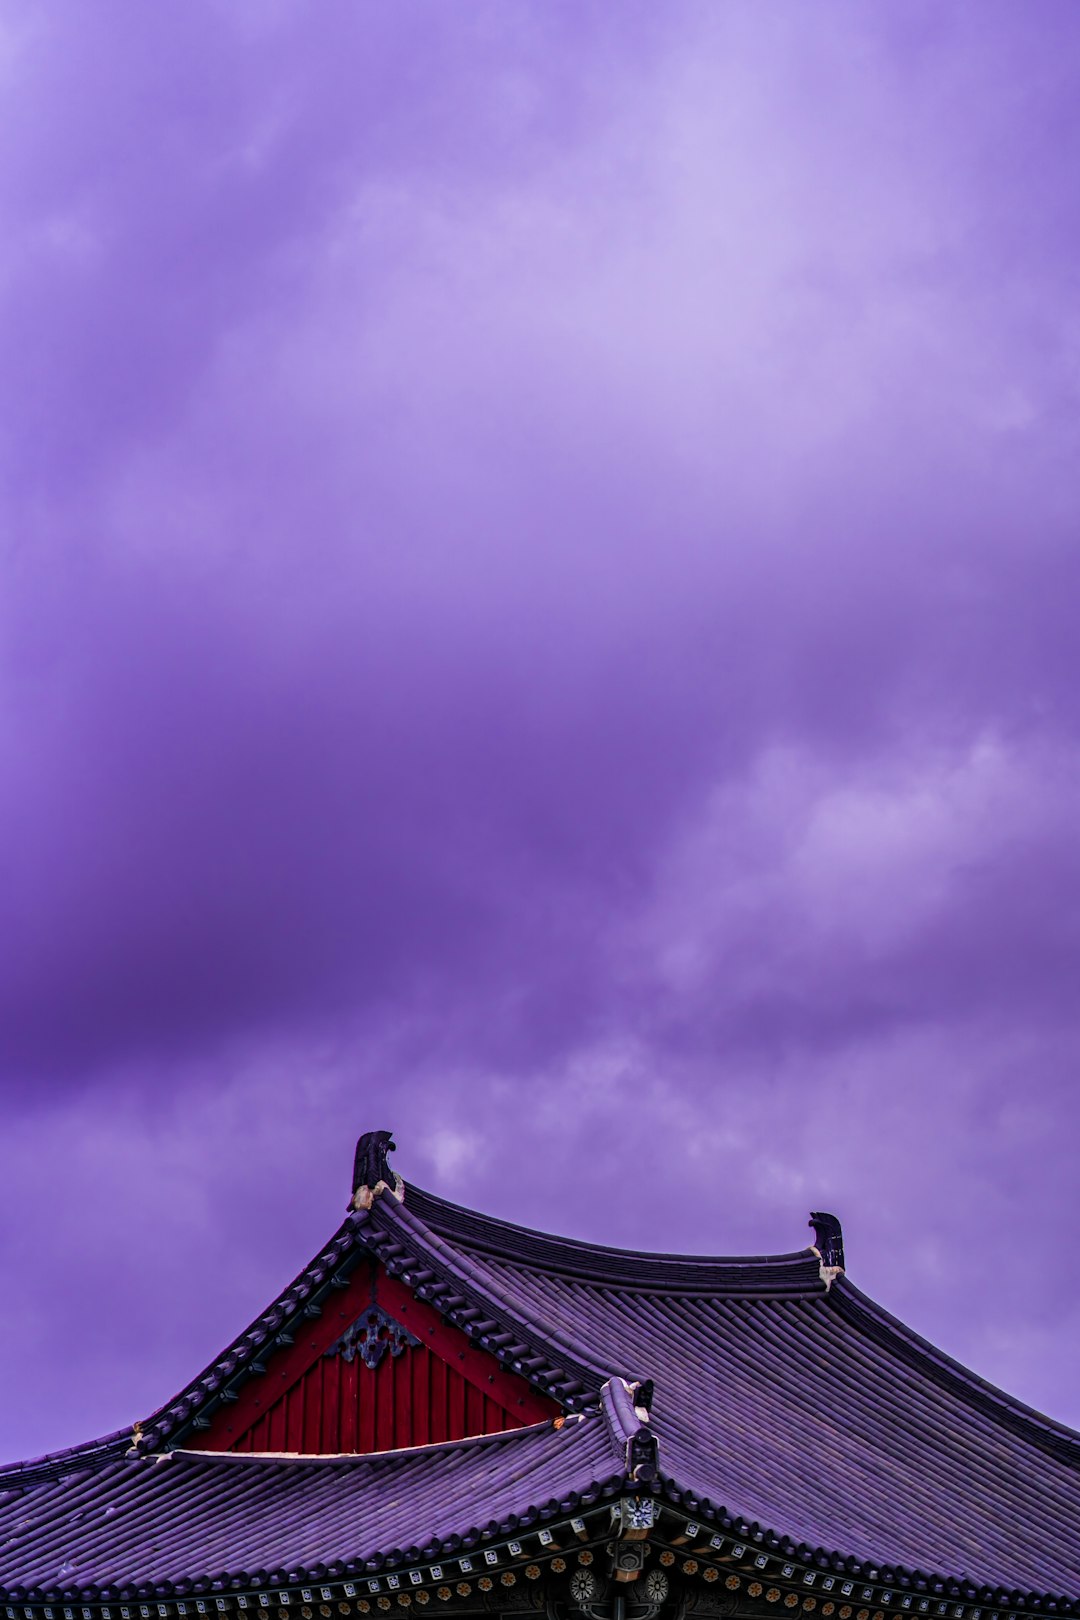 brown and black roof under purple sky